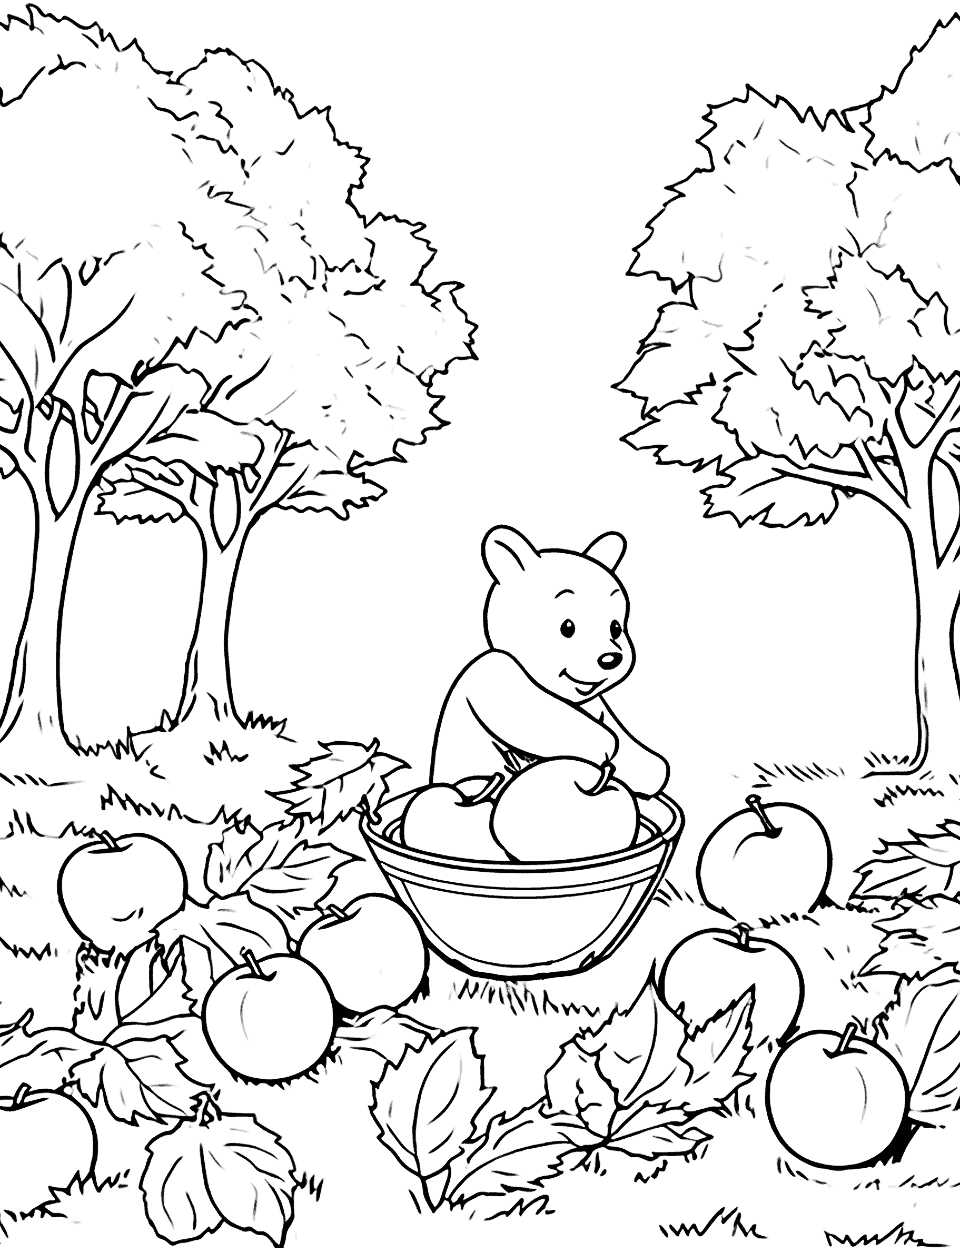 Winnie the Pooh's Fall Journey Coloring Page - Winnie the Pooh and friends on a fall journey, surrounded by colorful leaves and pumpkins.